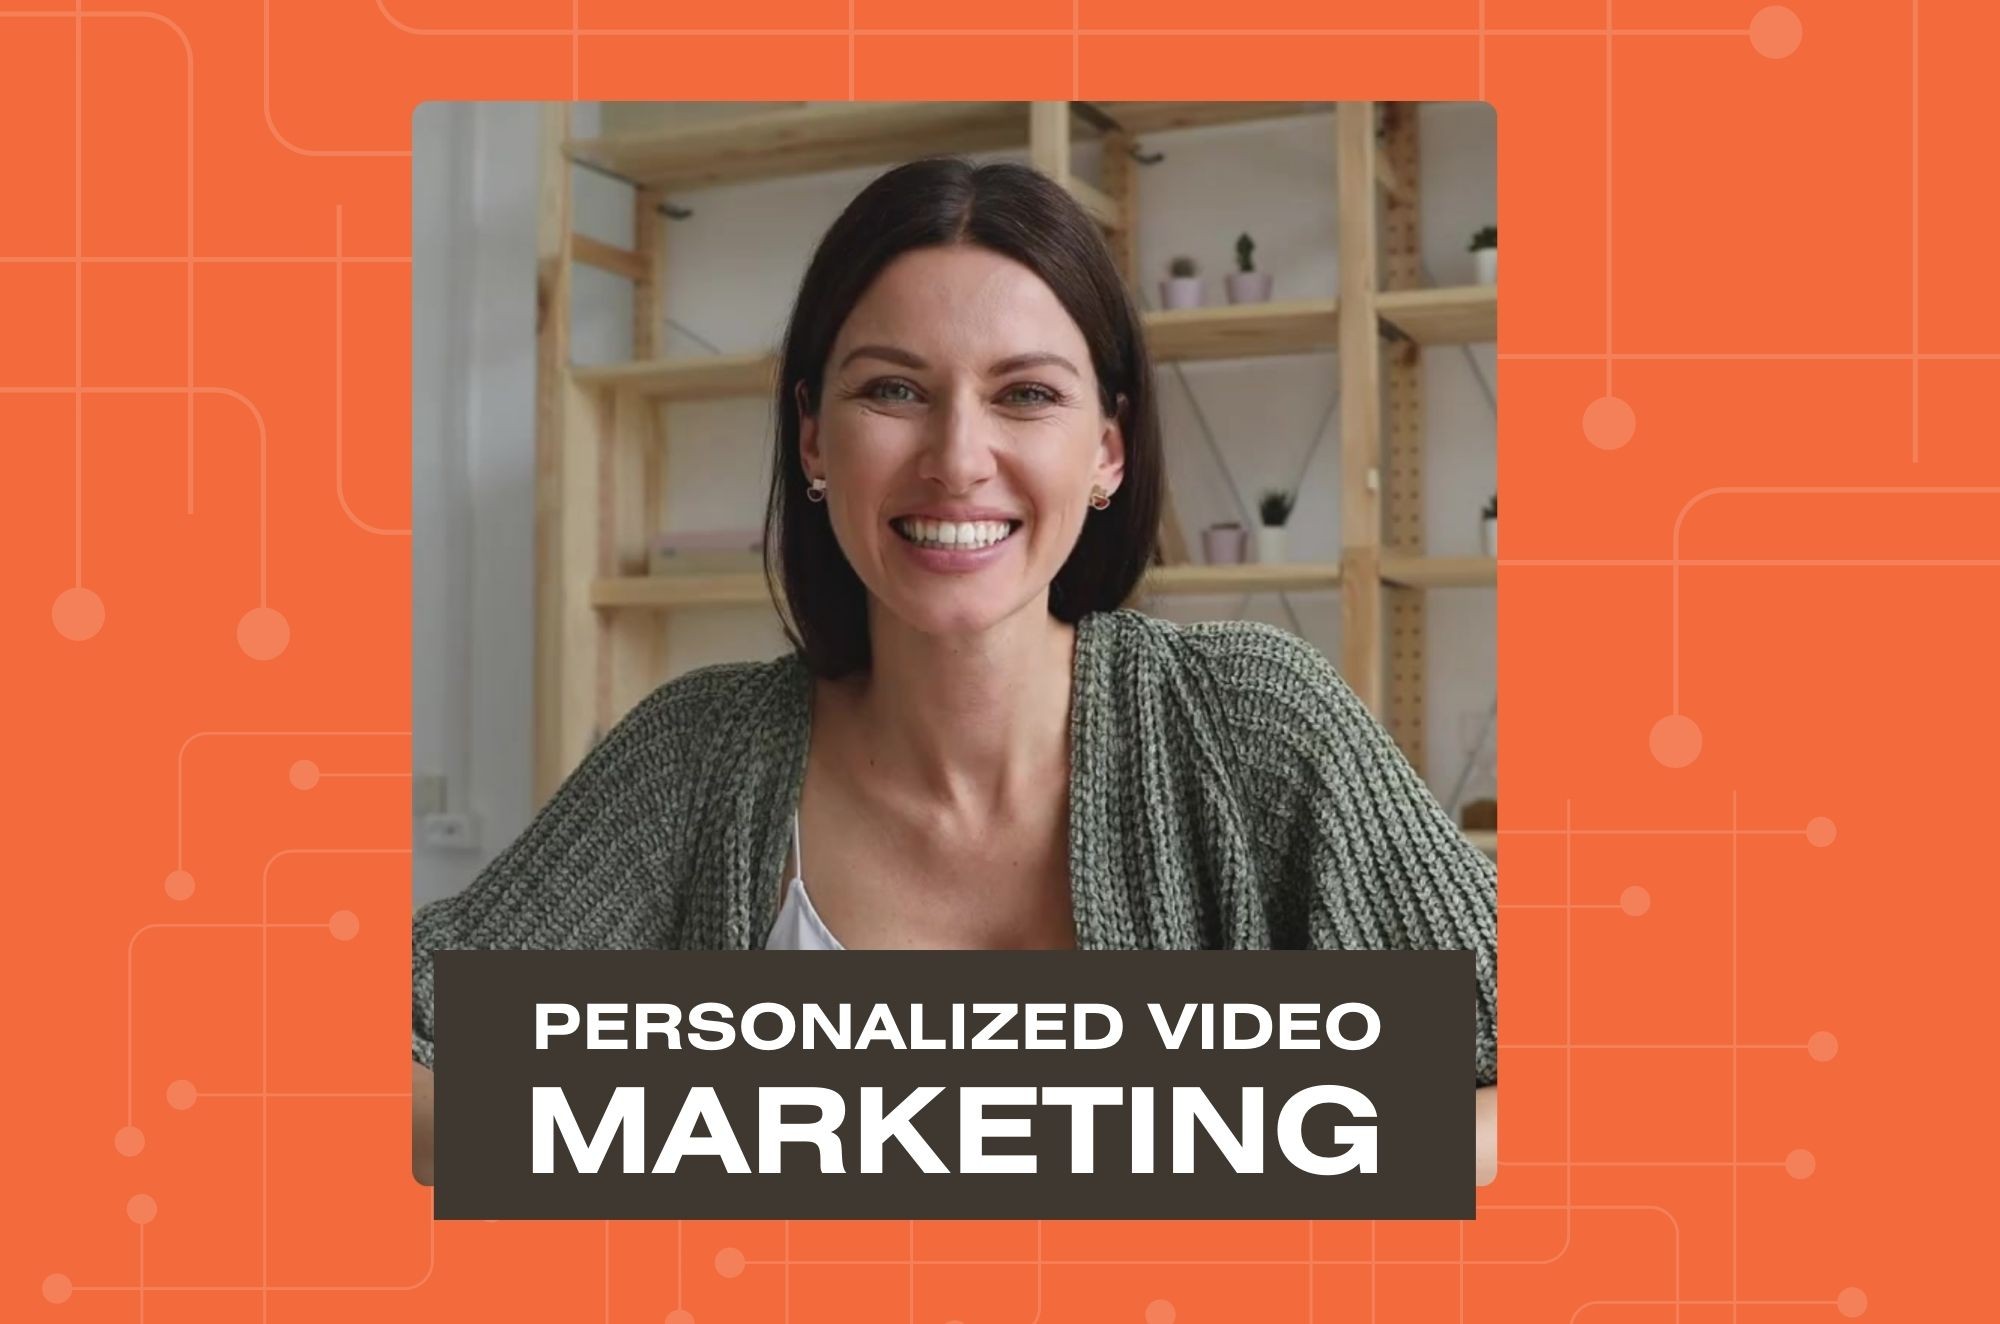 Is Personalized Video Marketing the Next BIG Thing